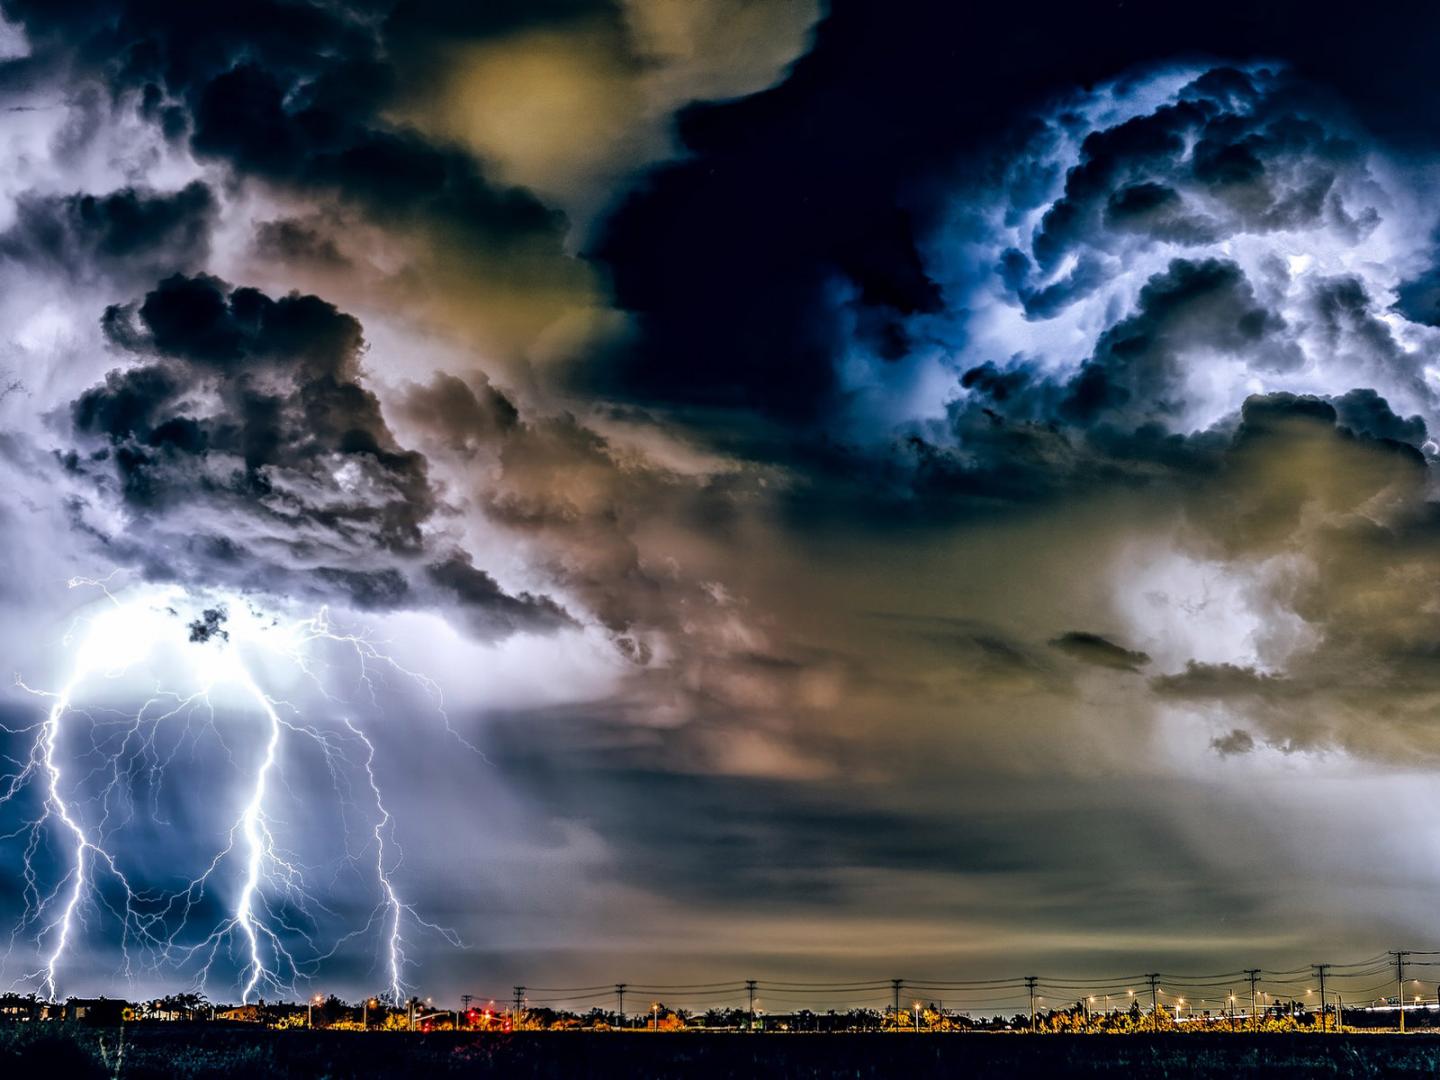 Thunderstorm stirs over a cityscape